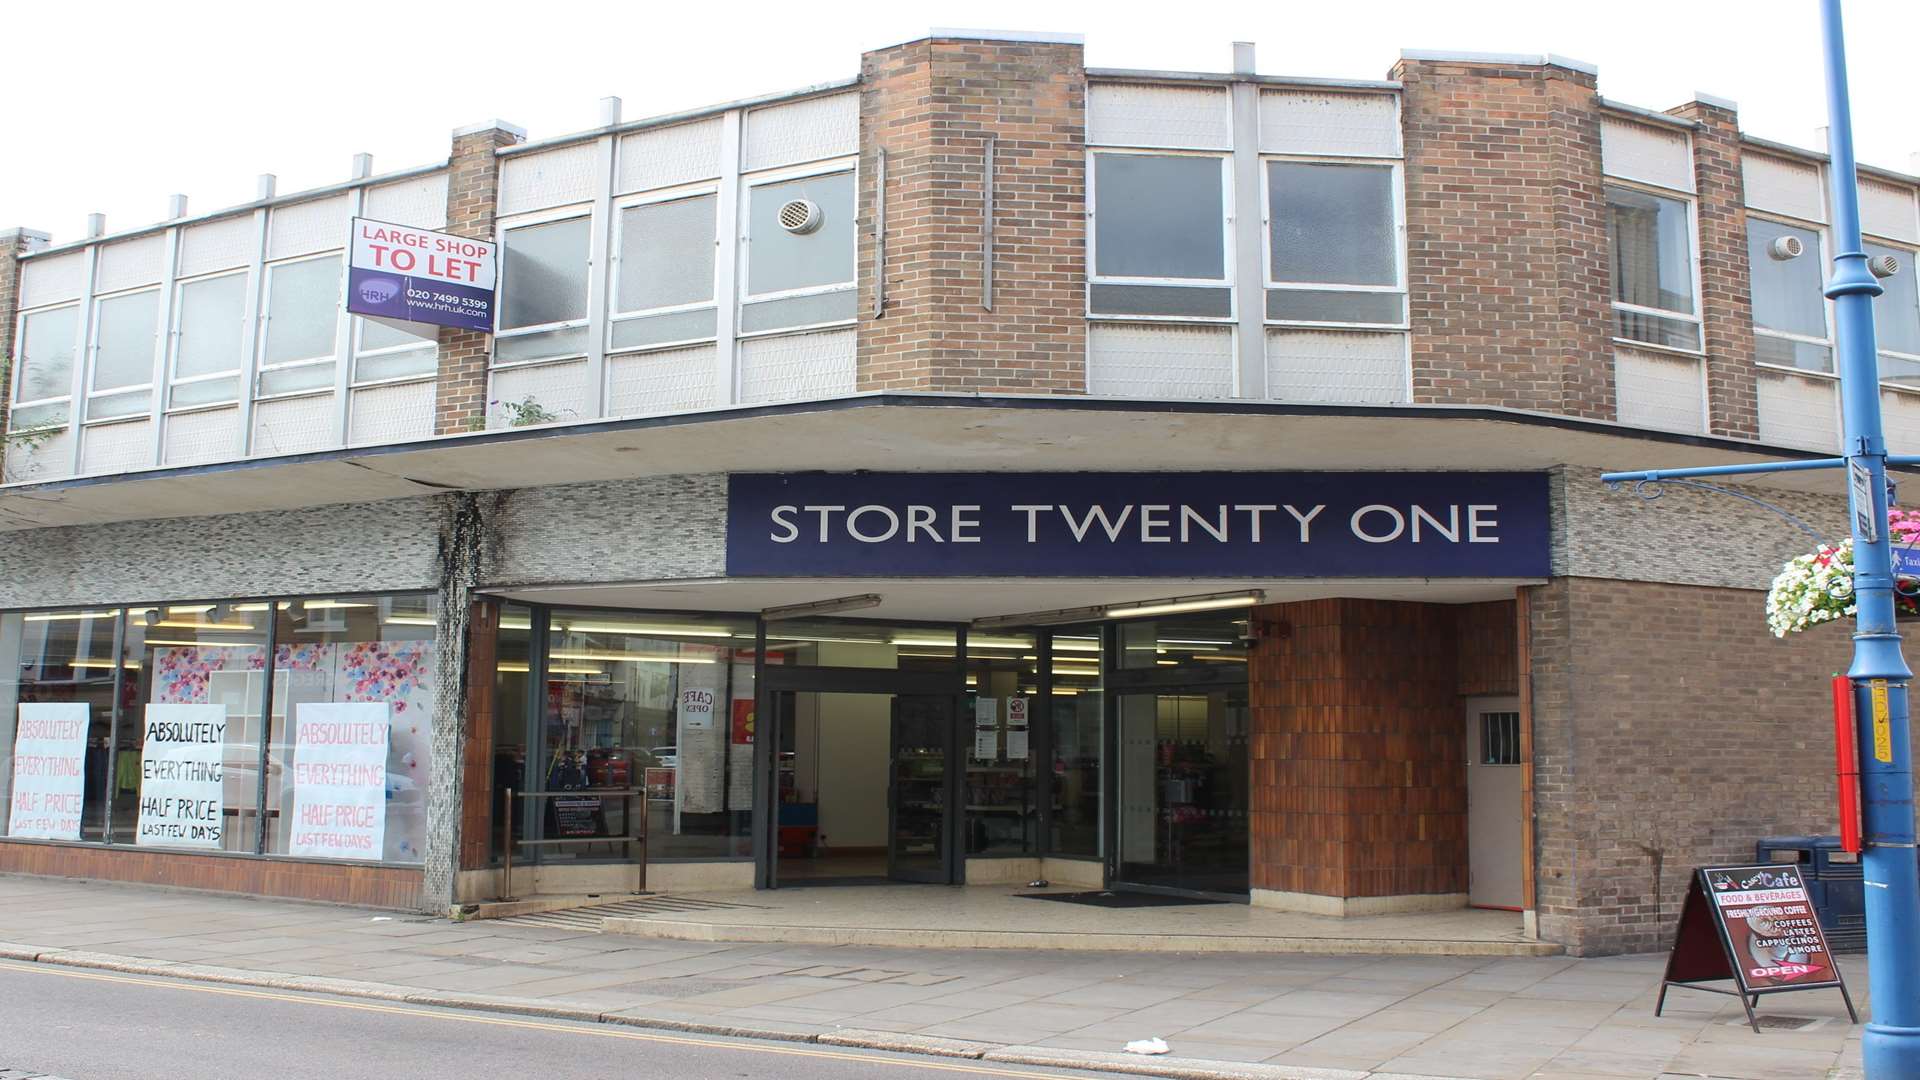 The former Store Twenty One shop in Sheerness High Street.